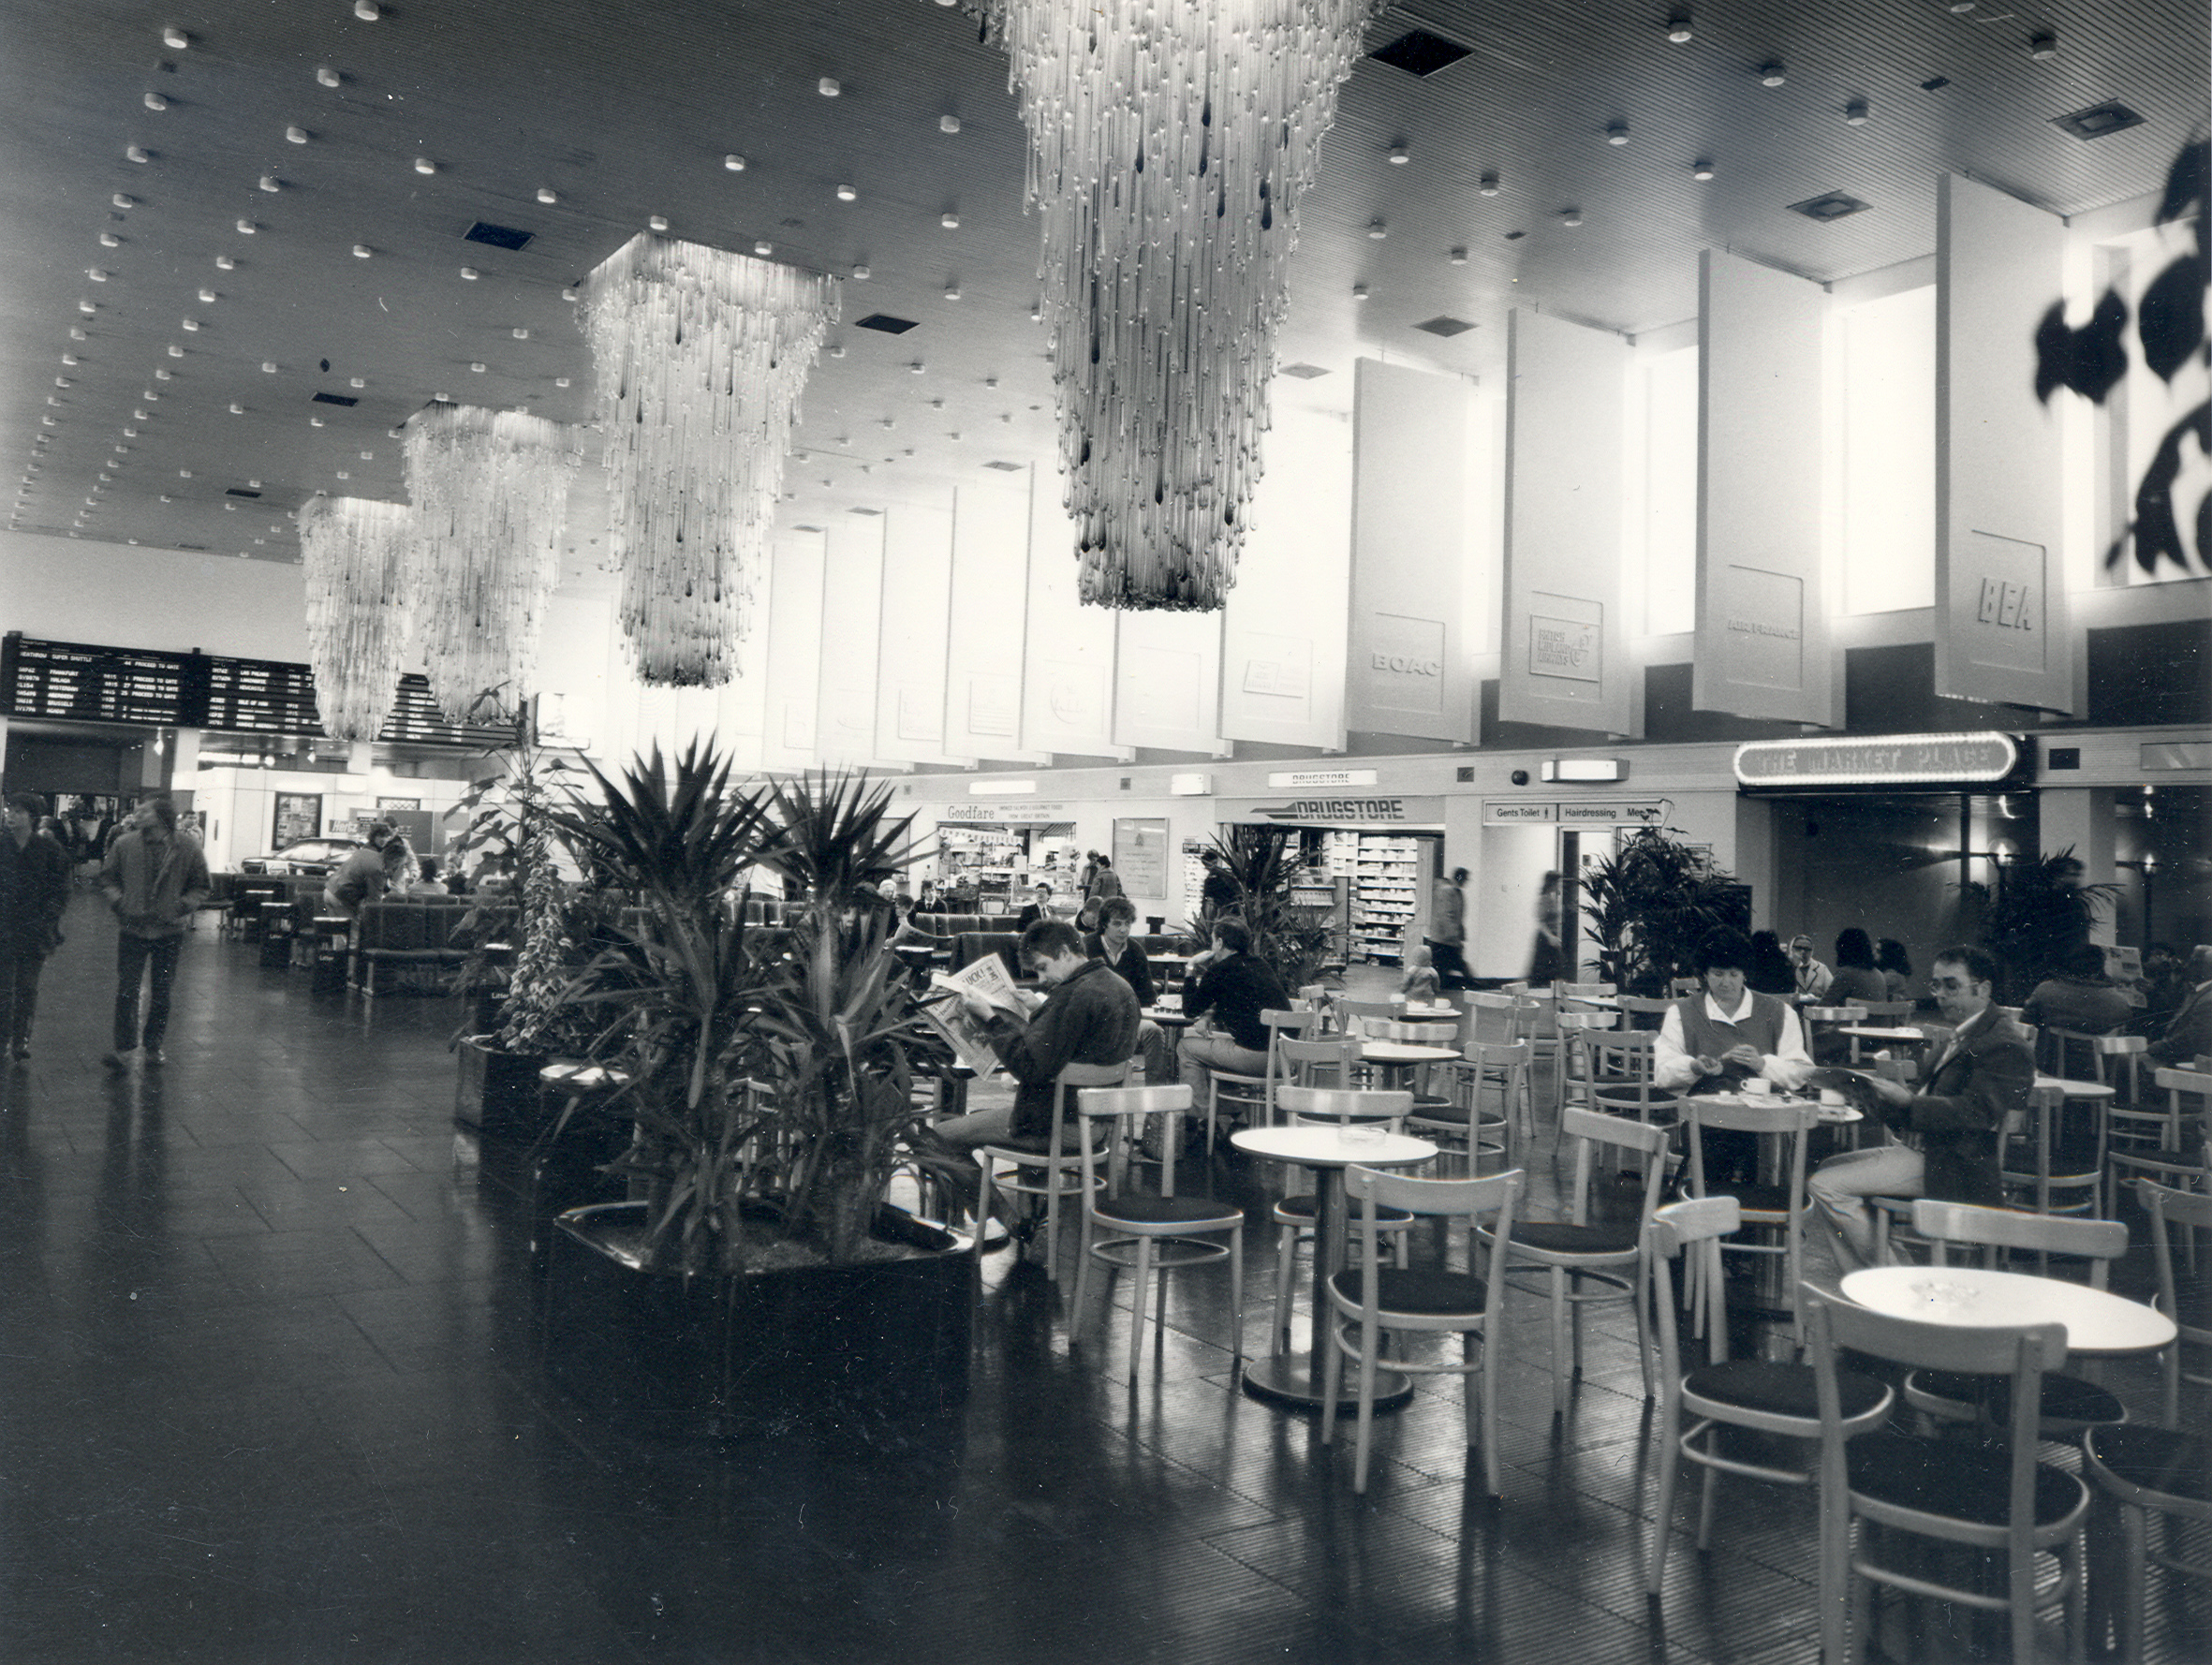 Image showing Manchester Airport’s iconic chandeliers